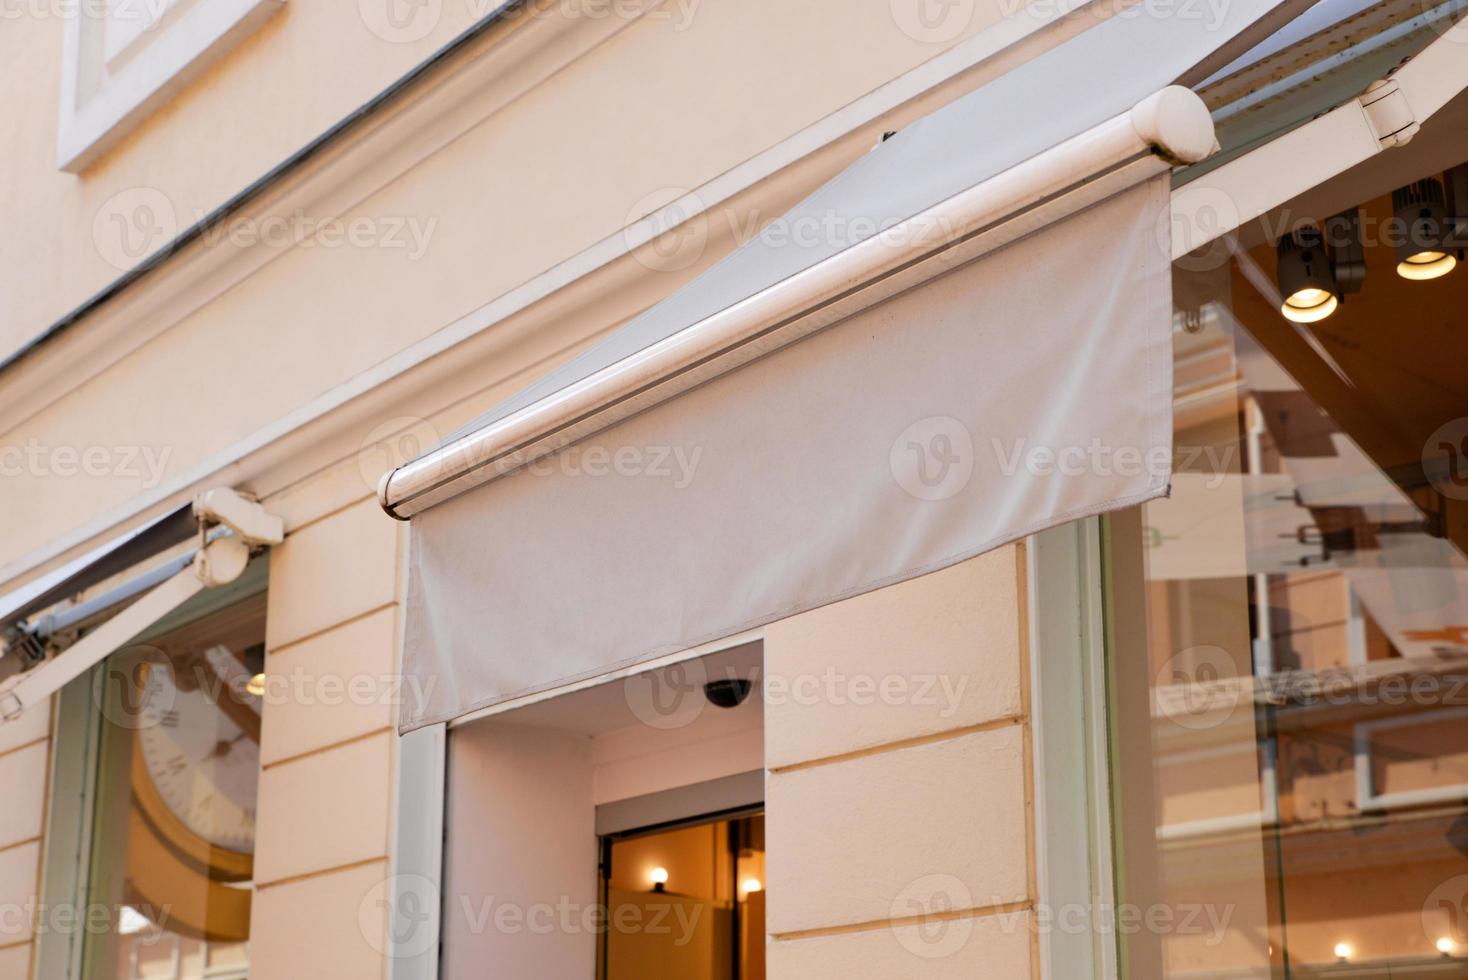 Shop awning on modern on the modern city facade and shop window. Clean for text or logo presentation photo